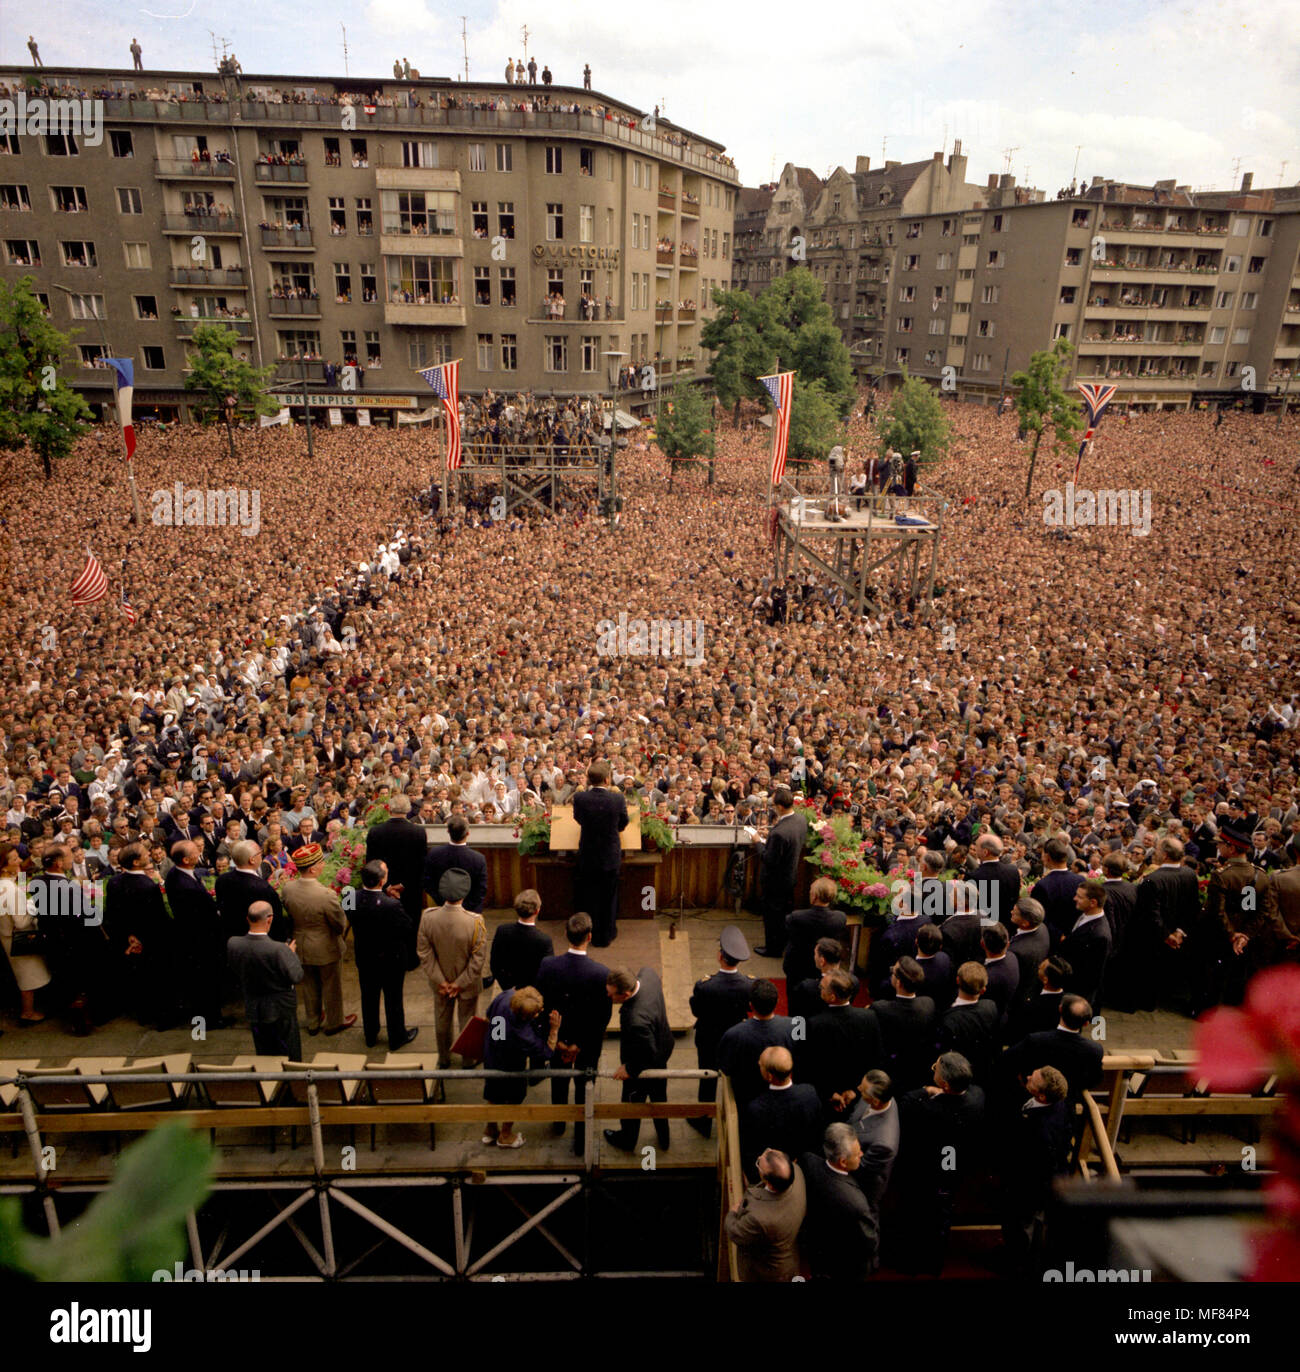 KN-C29248  26 June 1963  President John F. Kennedy delivering an address in West Berlin. Photograph is a rear view of President Kennedy and others on podium and shows the large crowd and cameramen viewing the address. Rathaus, West Berlin, Germany.   Please credit: Robert Knudsen, White House/John F. Kennedy Presidential Library and Museum, Boston. Stock Photo